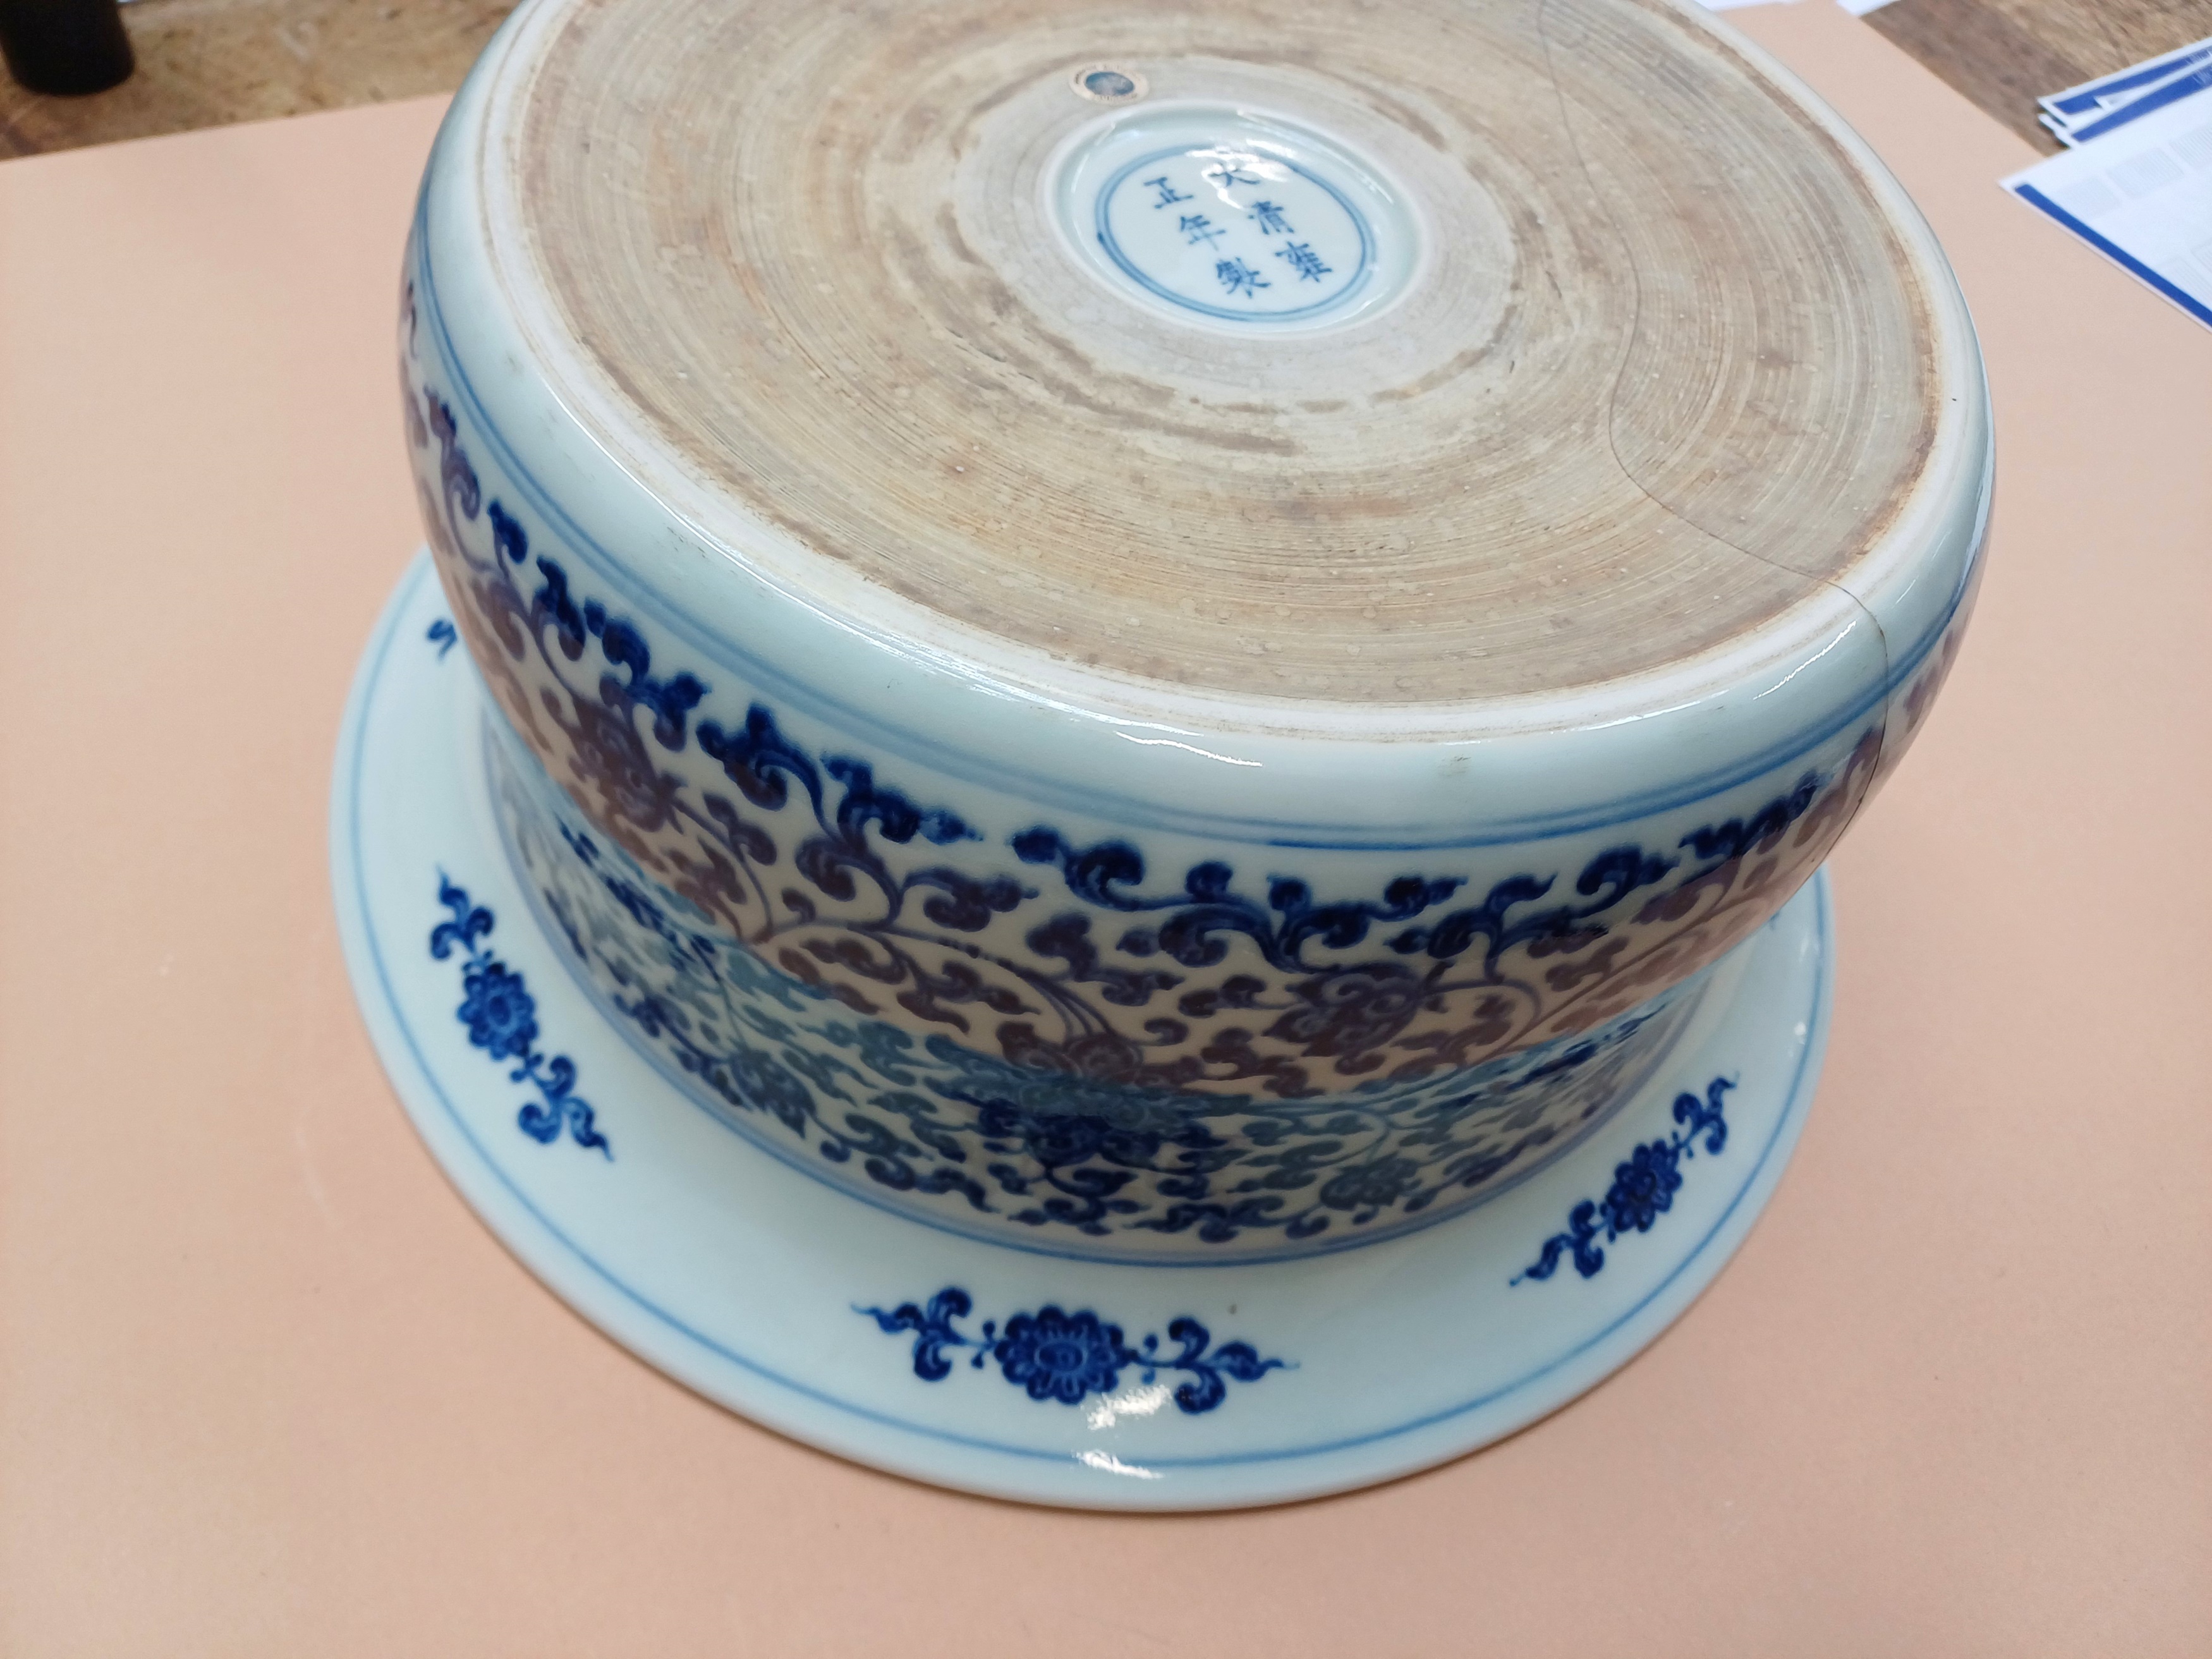 A CHINESE MING-STYLE BLUE AND WHITE 'LOTUS' BASIN 明式青花纏枝蓮紋盆 《大清雍正年製》款 - Image 11 of 14